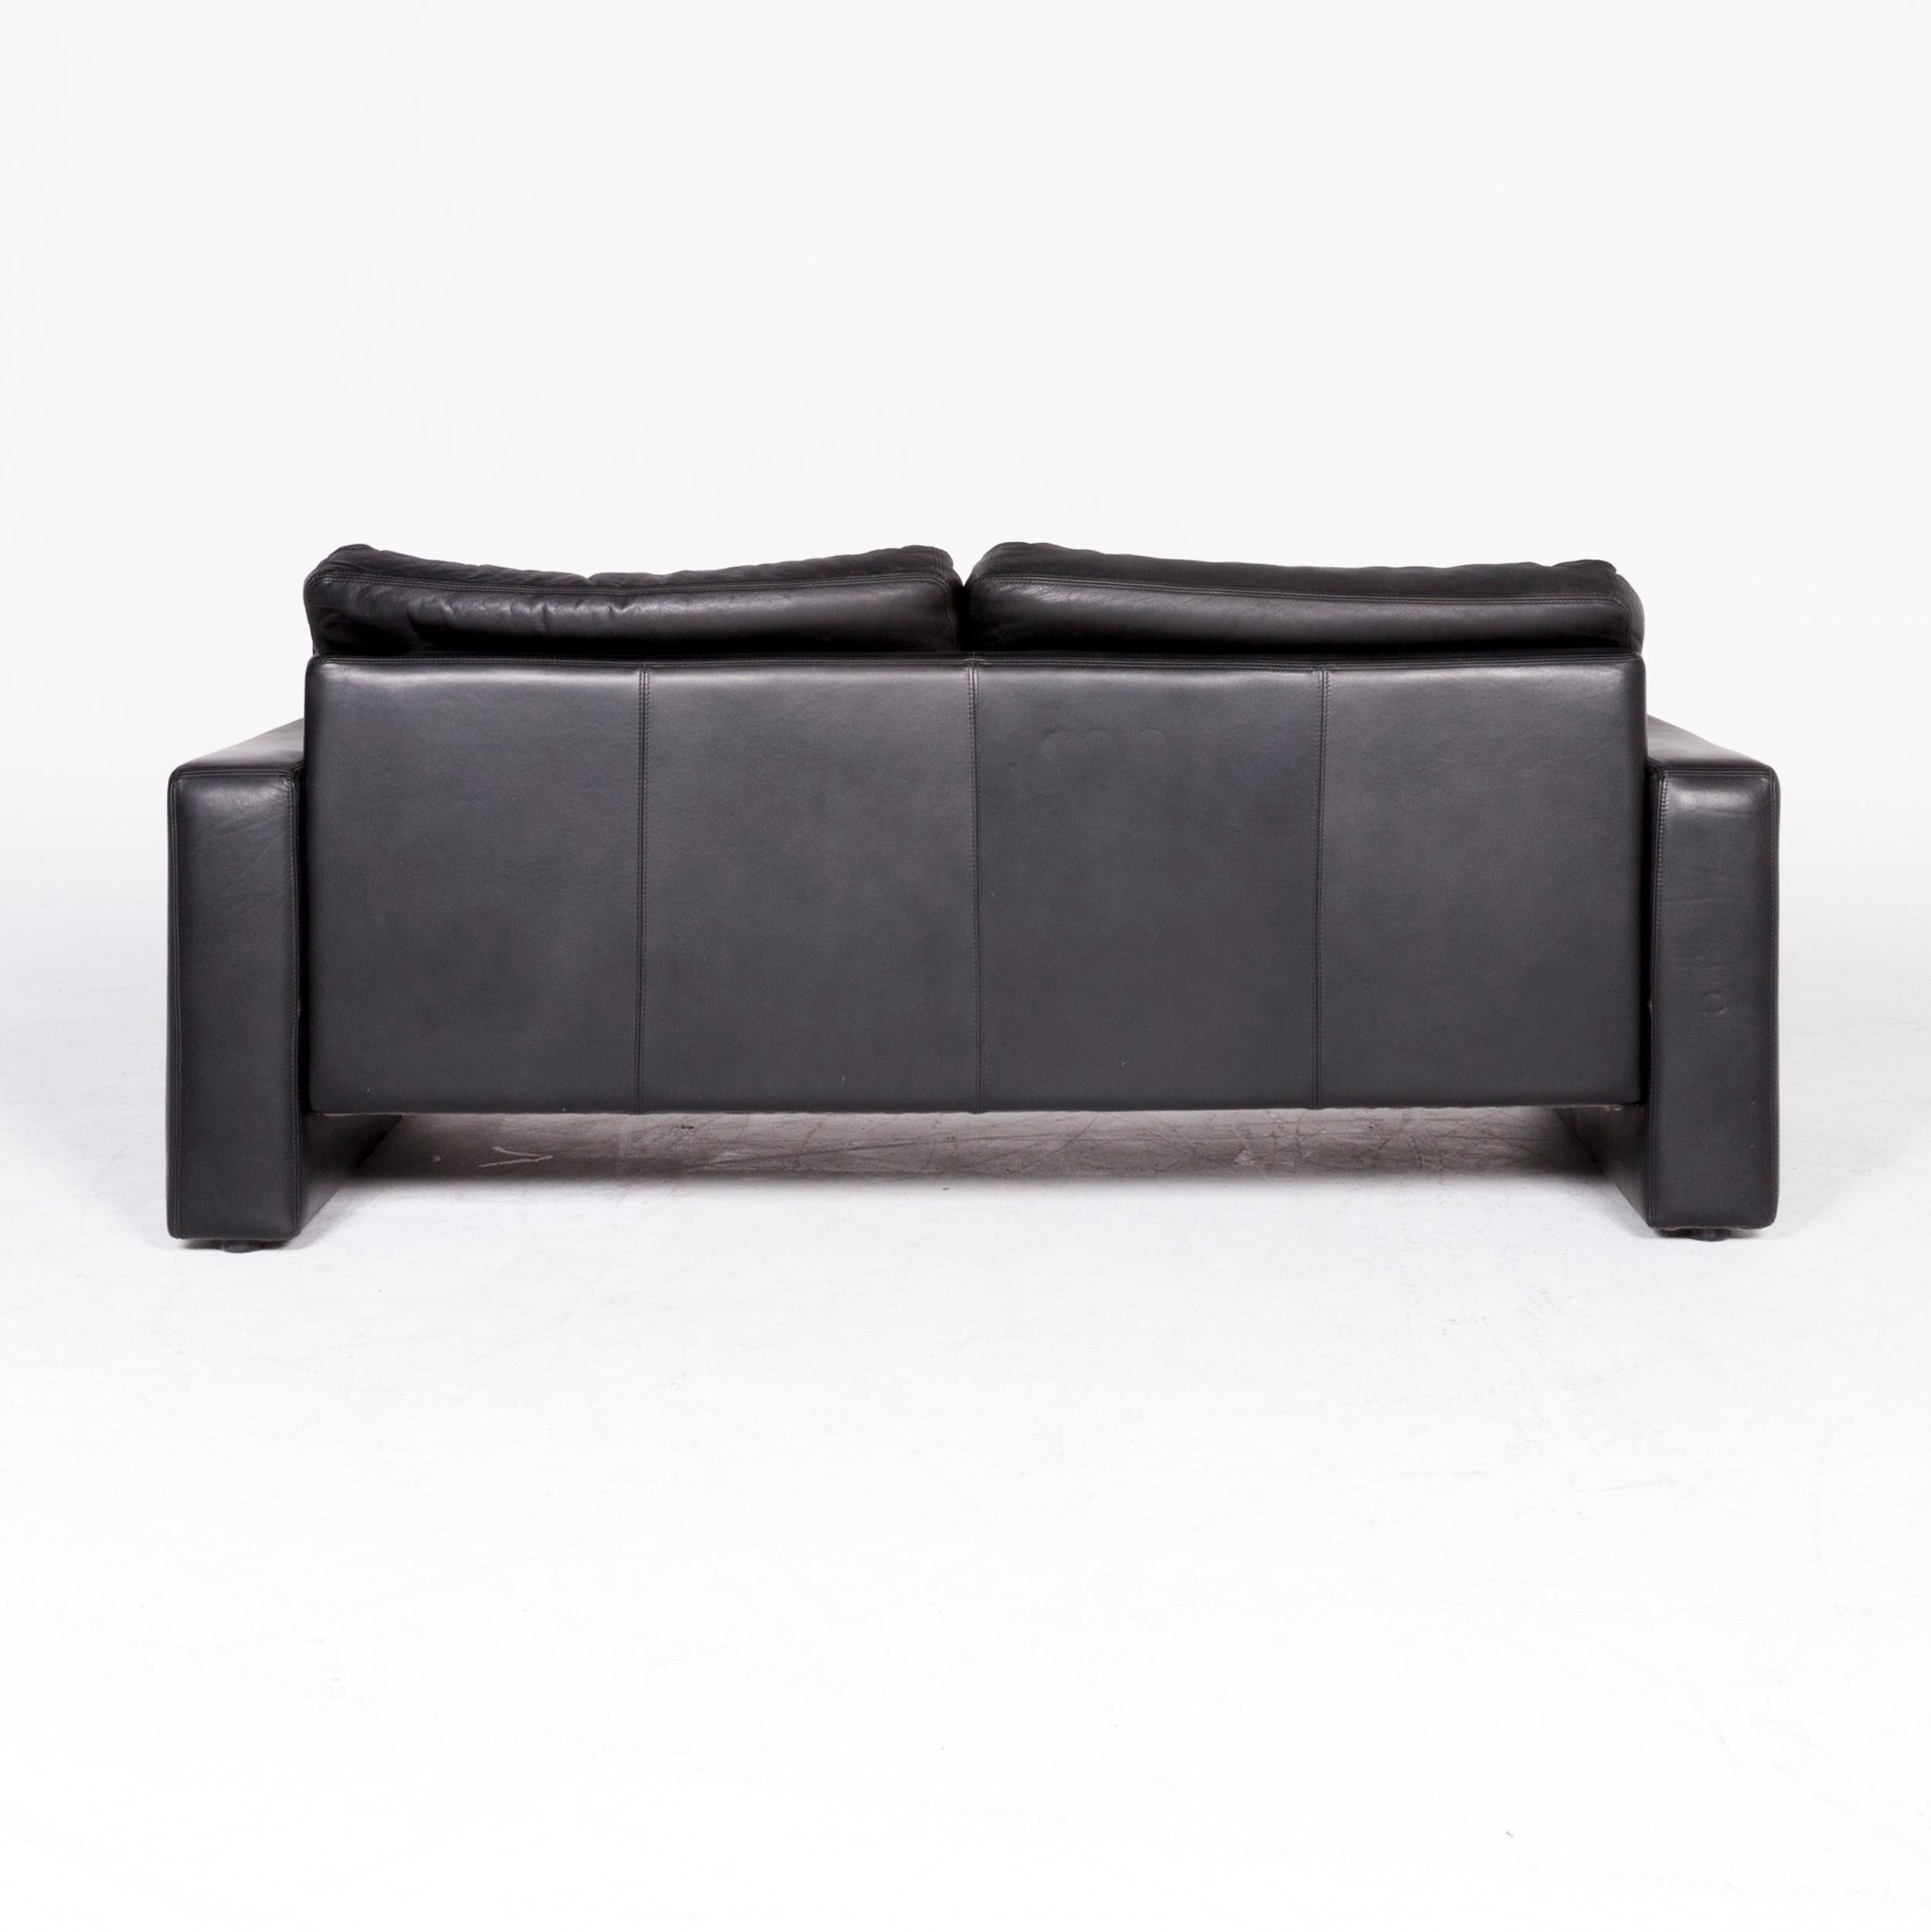 Contemporary Schröno Designer Leather Sofa Black Genuine Leather Two-Seat Couch